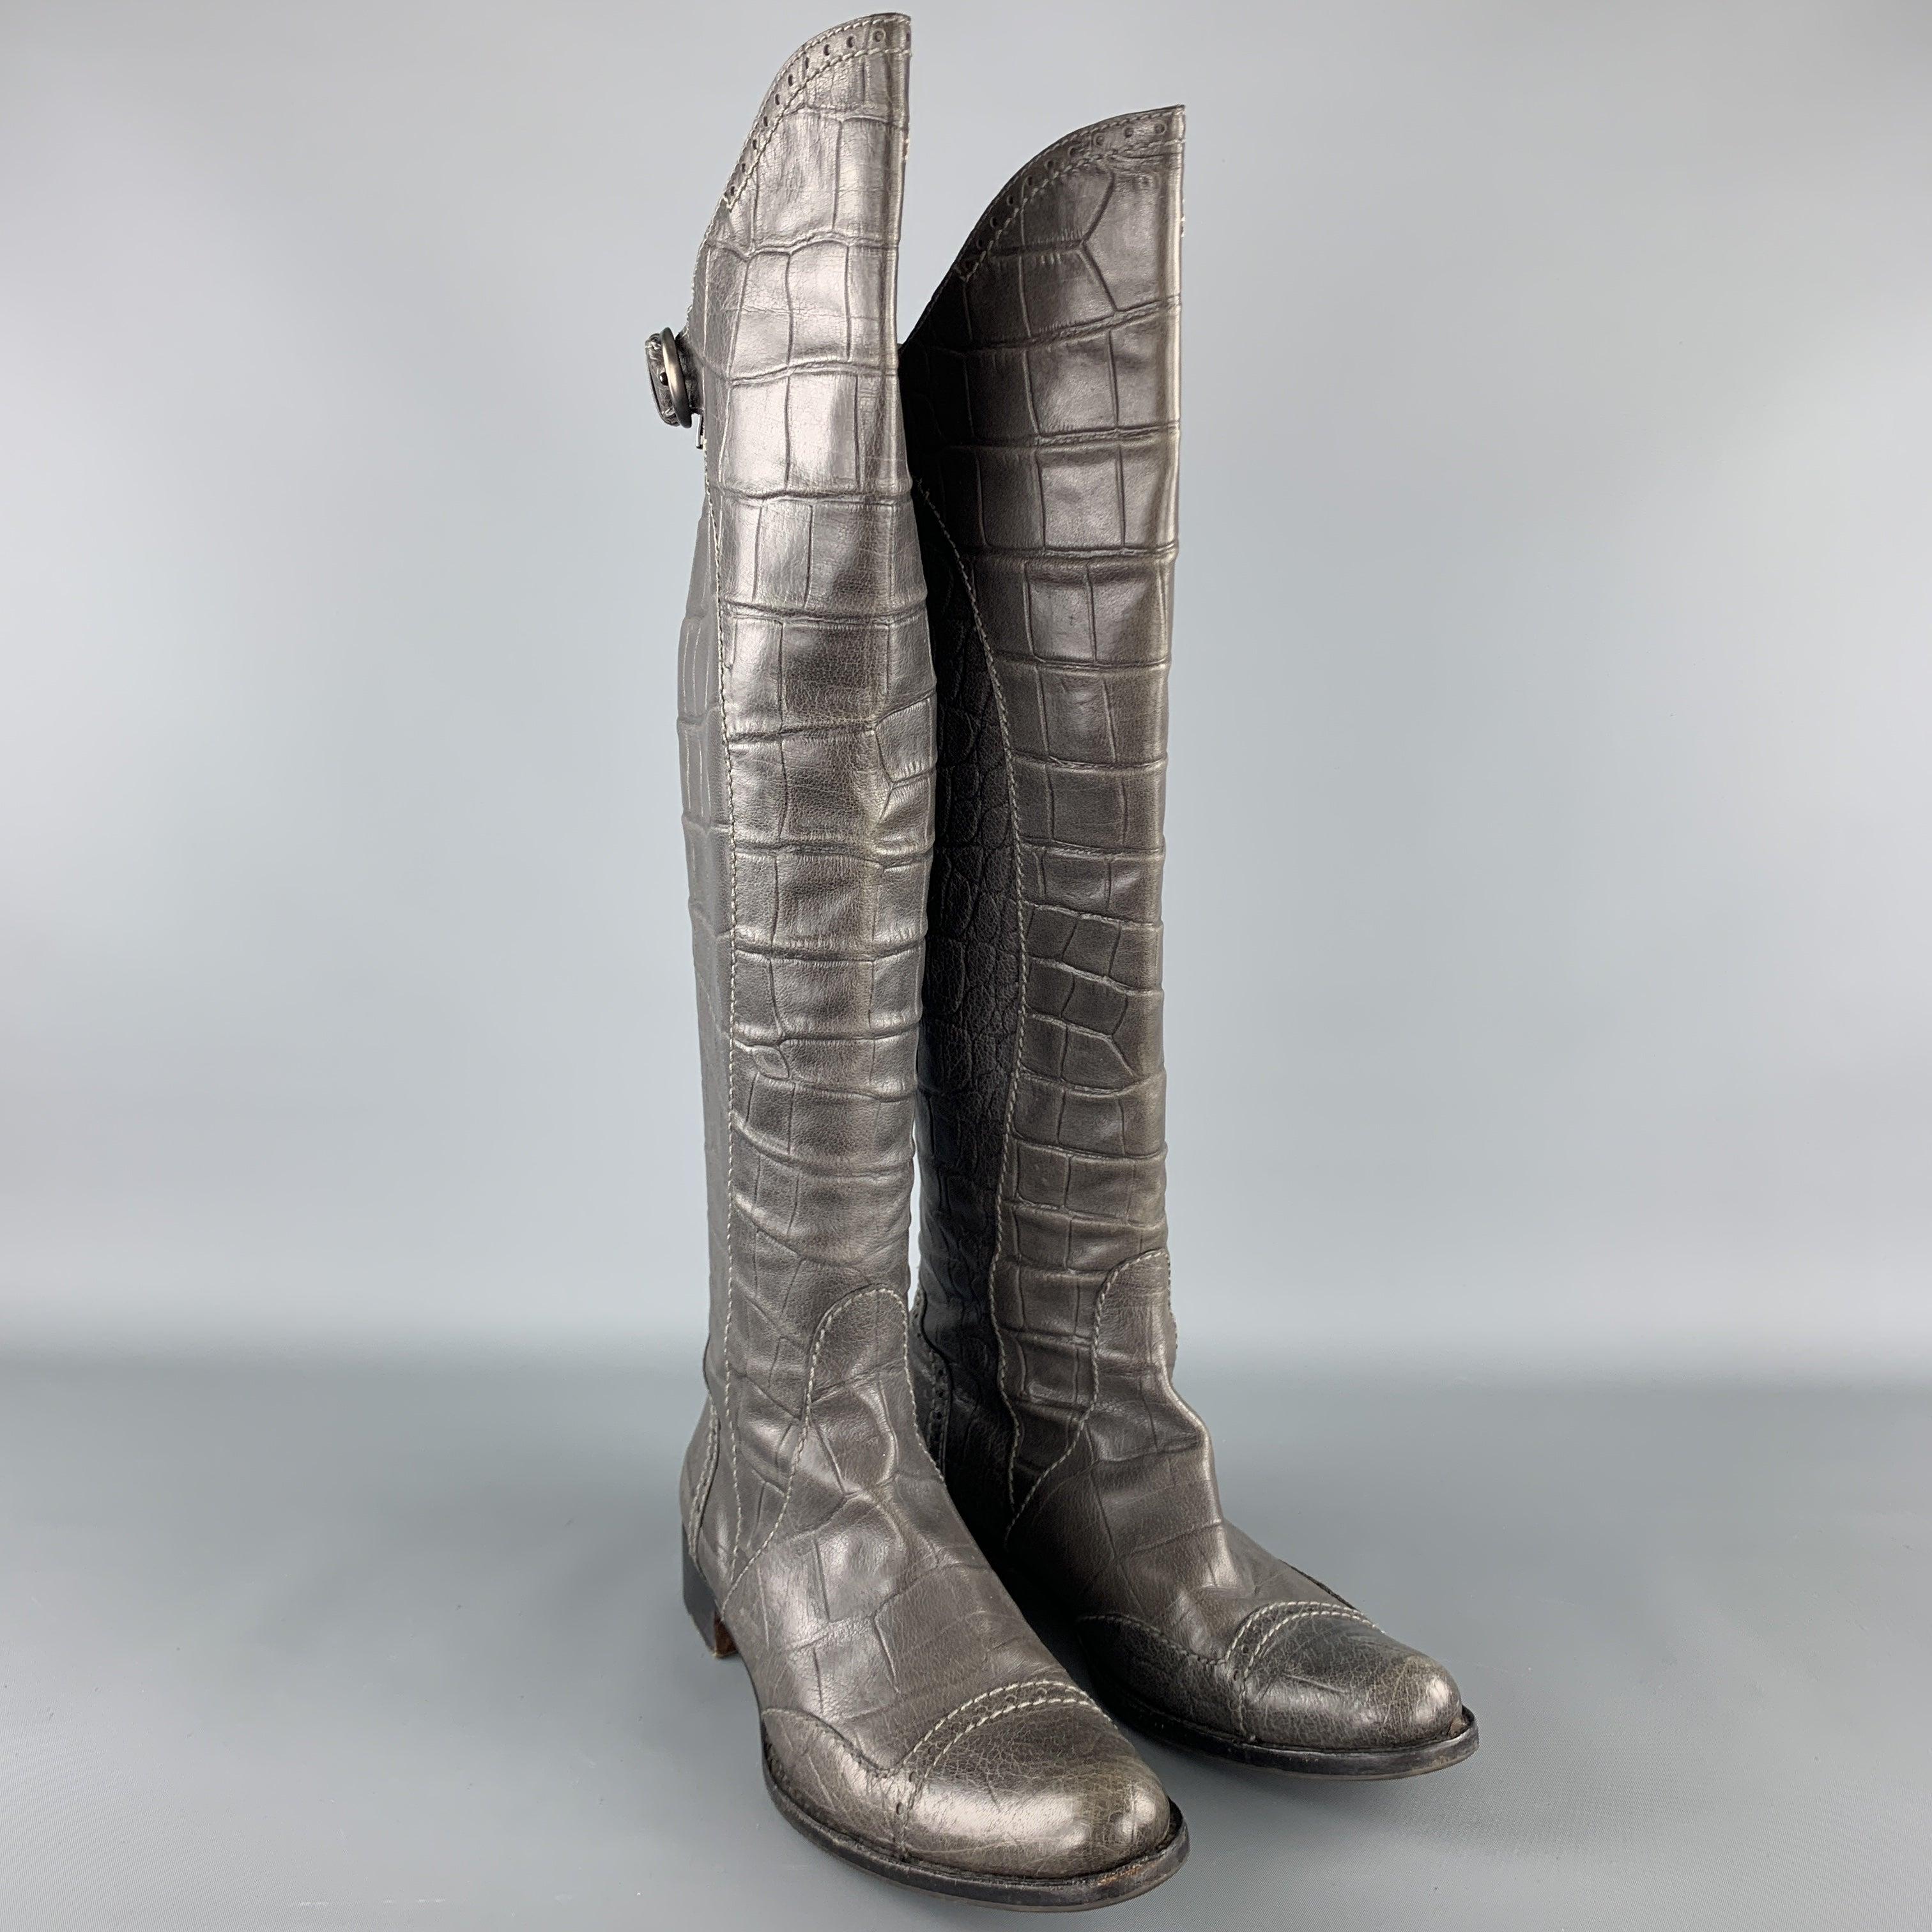 HENRY BEGUELIN boots come in grey crocodile embossed leather with a pointed cap toe, knee high shaft, and back zip closure with strap. Handmade in Italy.Very Good
Pre-Owned Condition. 

Marked:   IT 38.5Outsole: 11 x 3.75 inches Length: 16.5-20